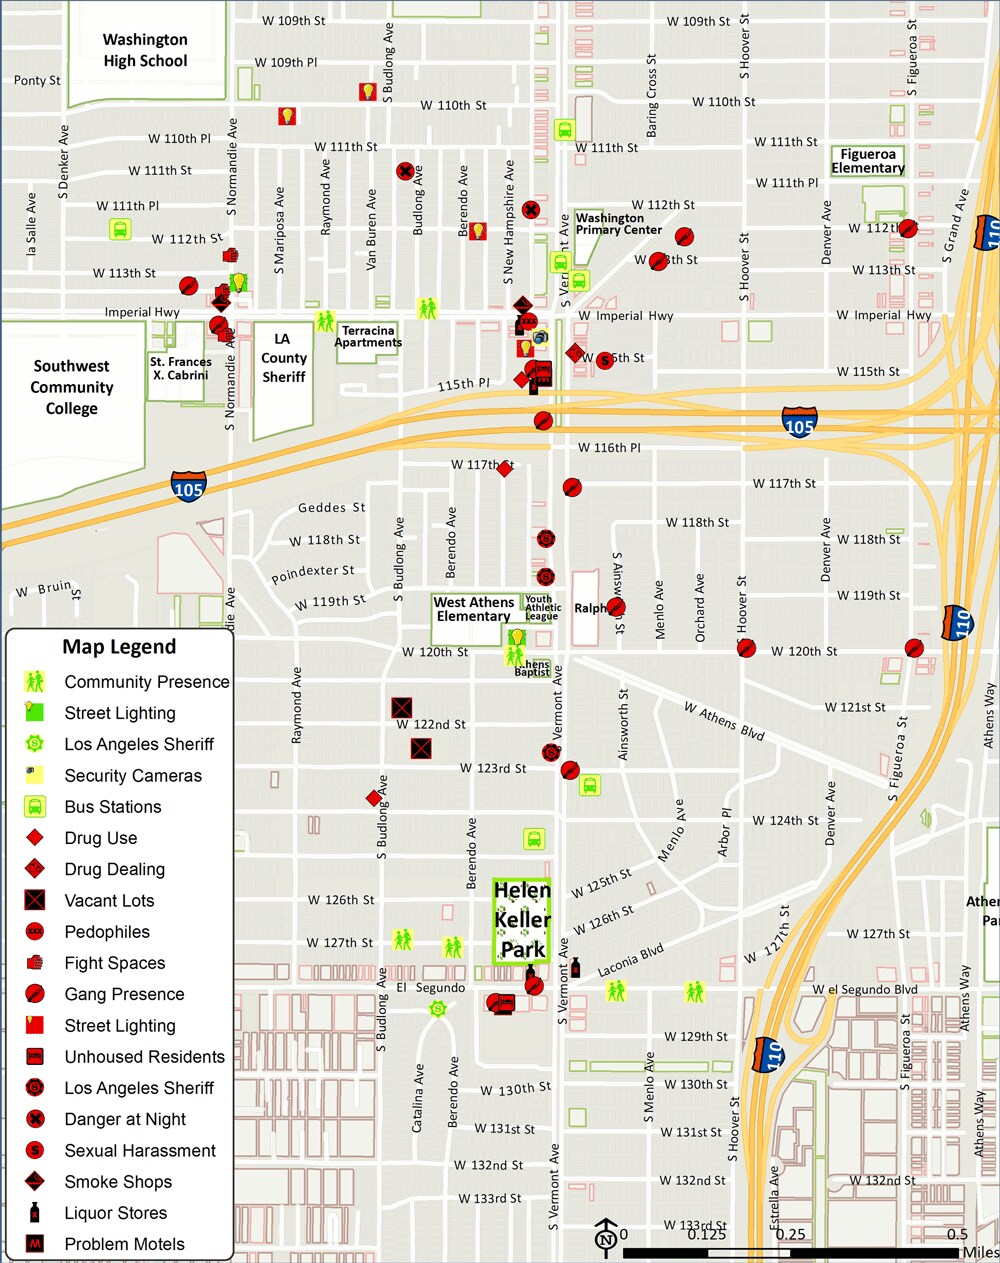 Digitized participatory geographic information systems map of community park access assets and challenges, South Los Angeles, 2015.